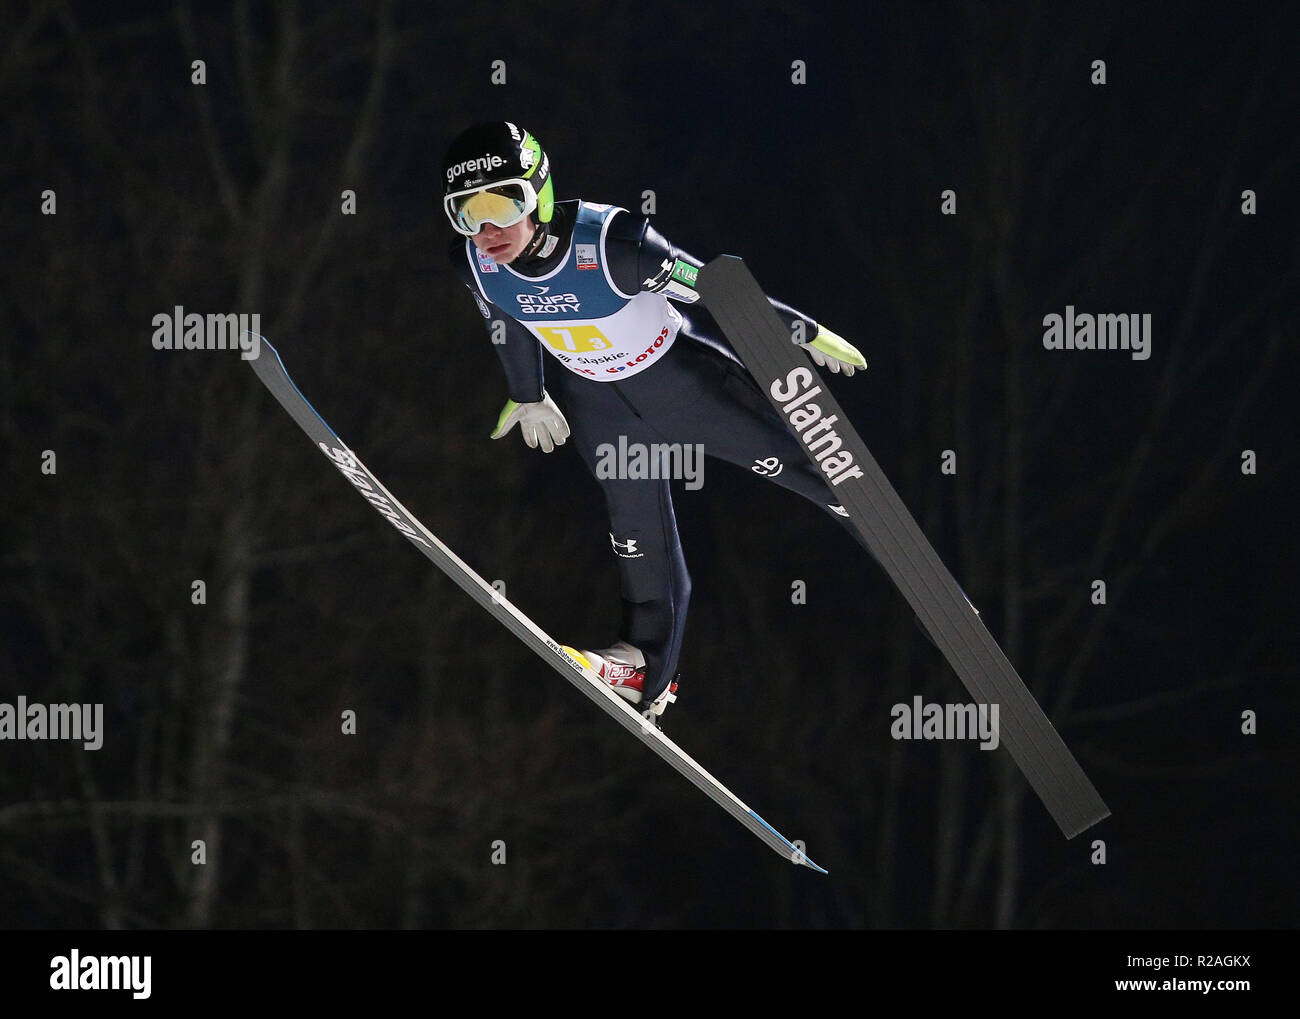 Wisla, Poland. 17th Nov, 2018. Anze Lanisek seen in action during the team competition of the FIS Ski Jumping World Cup in Wisla. Credit: SOPA Images Limited/Alamy Live News Stock Photo